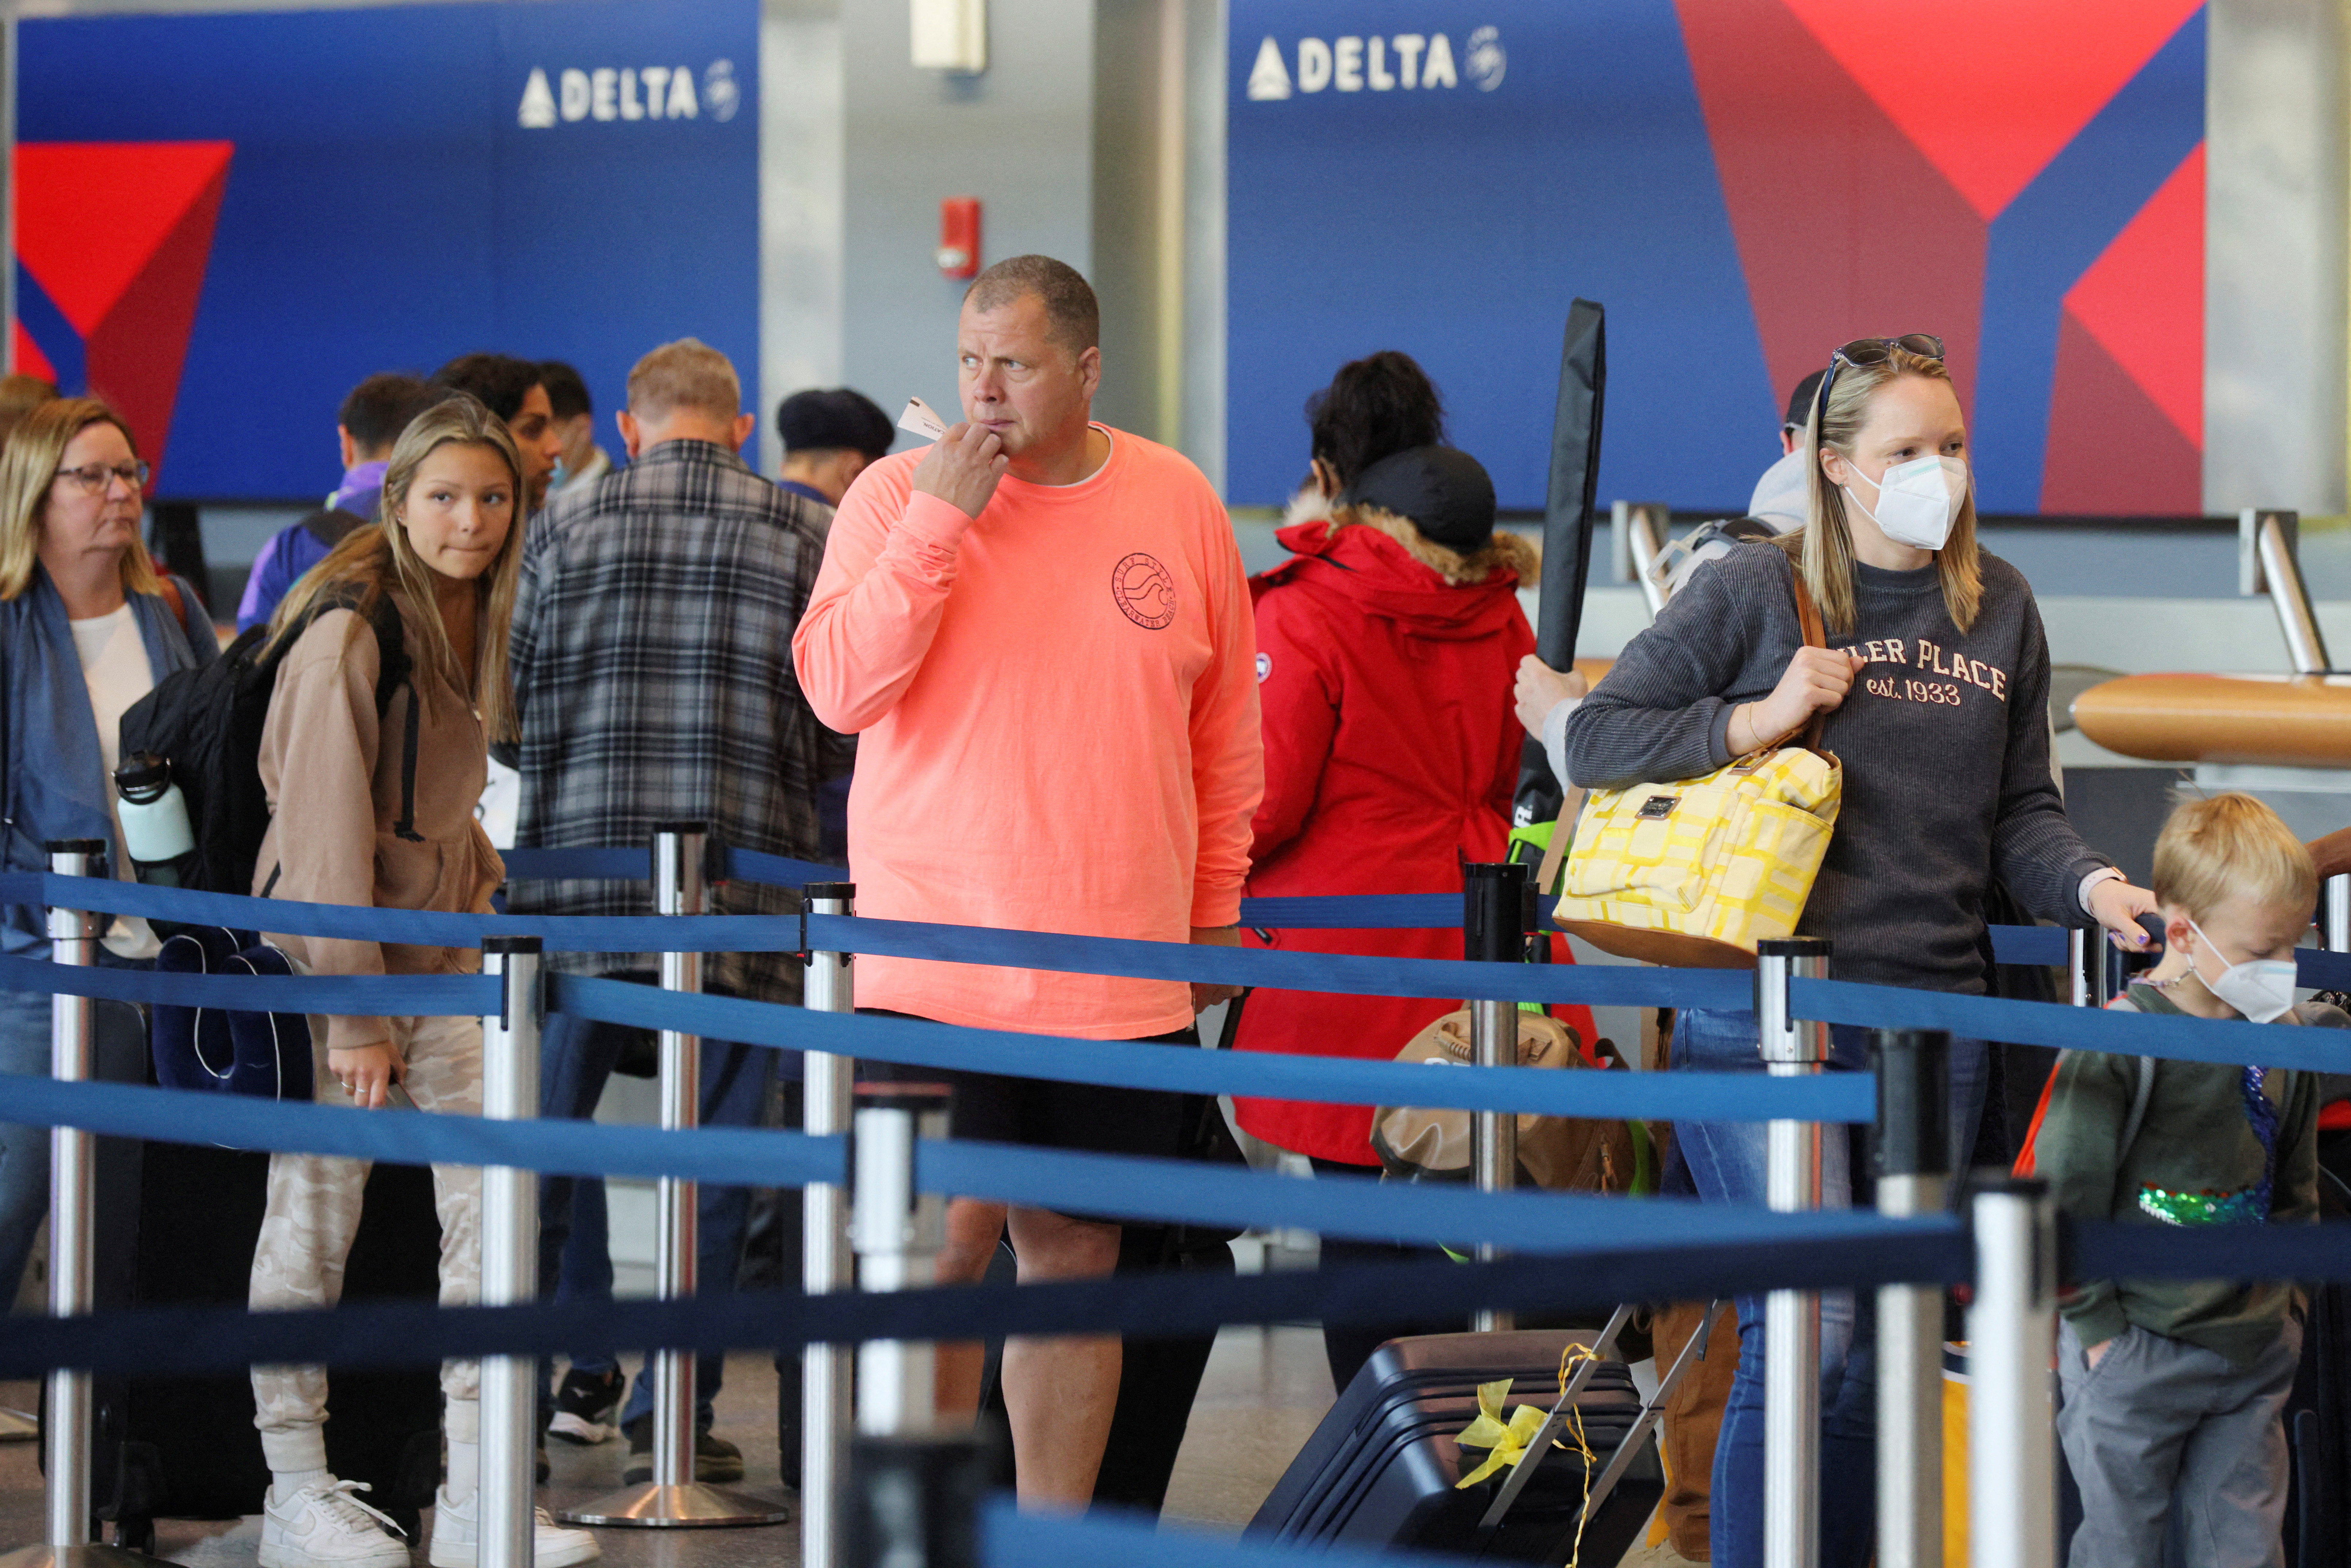 Travellers at Logan Airport after mask mandate struck down in Boston